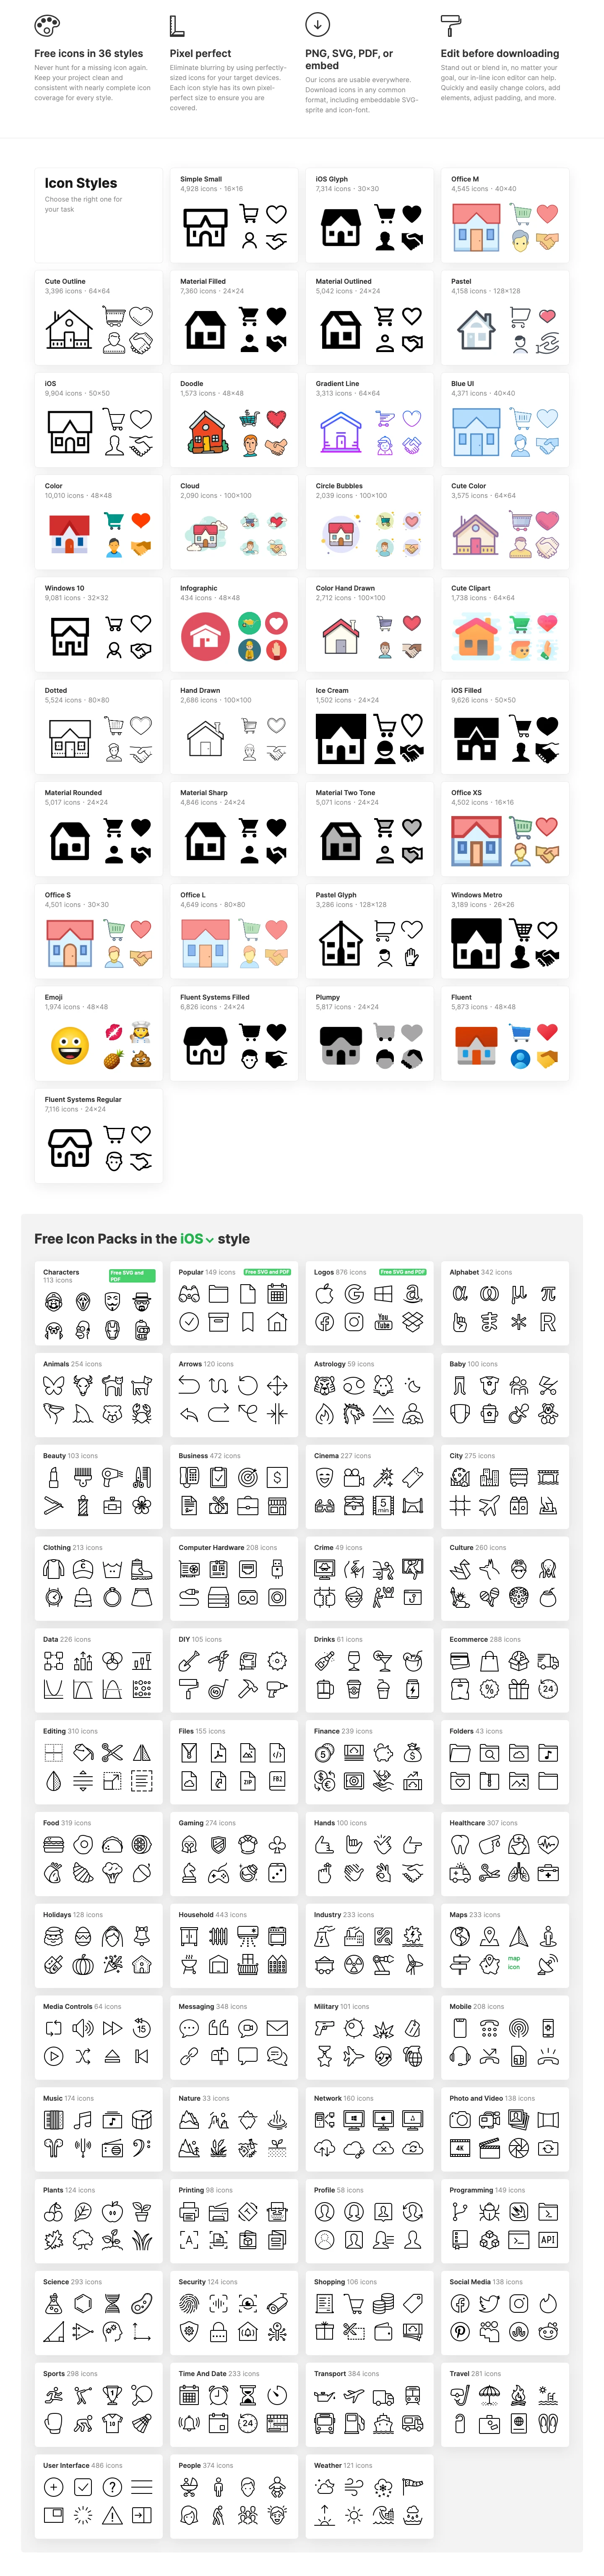 Icons8 Free Vector Icons - Get 169,500+ free icons for graphic design, UI, social media, and mobile. Search for static and animated icons with consistent quality. PNG, SVG, GIF, AE formats.